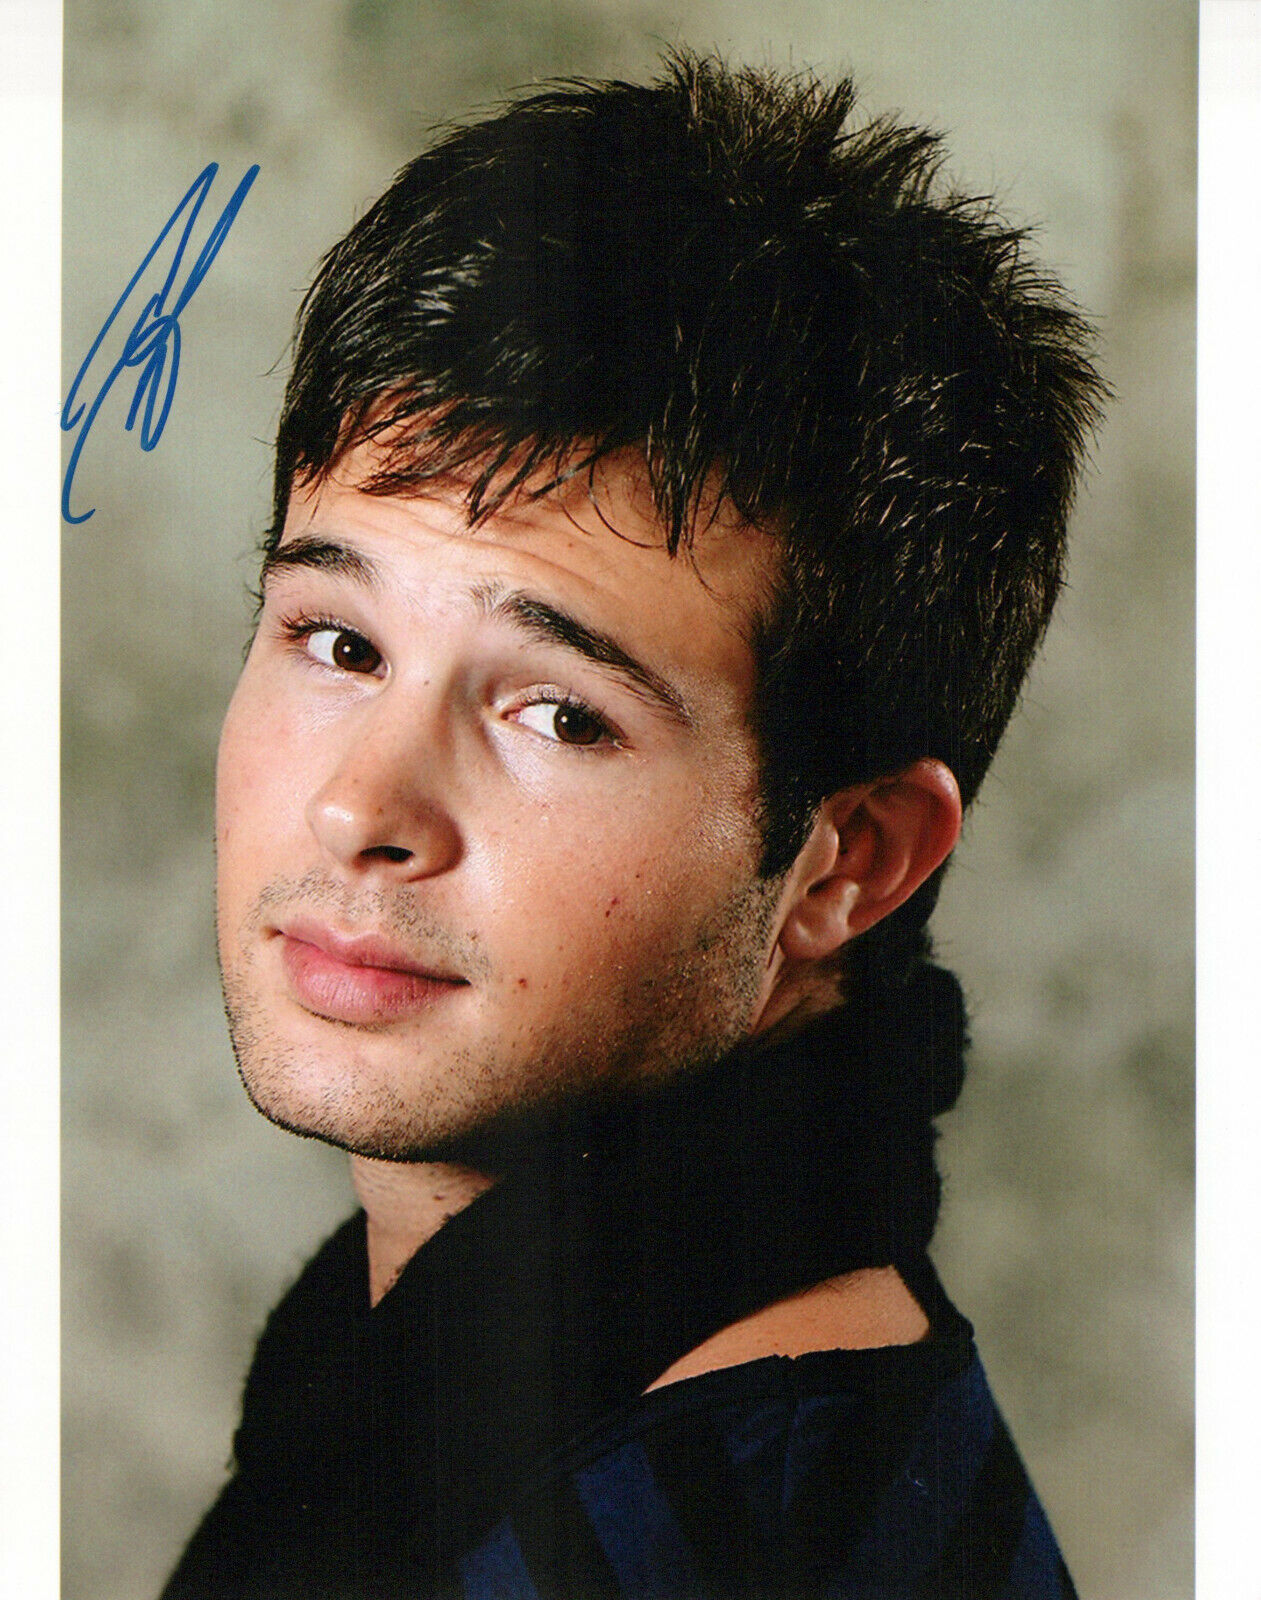 Cody Longo head shot autographed Photo Poster painting signed 8x10 #3